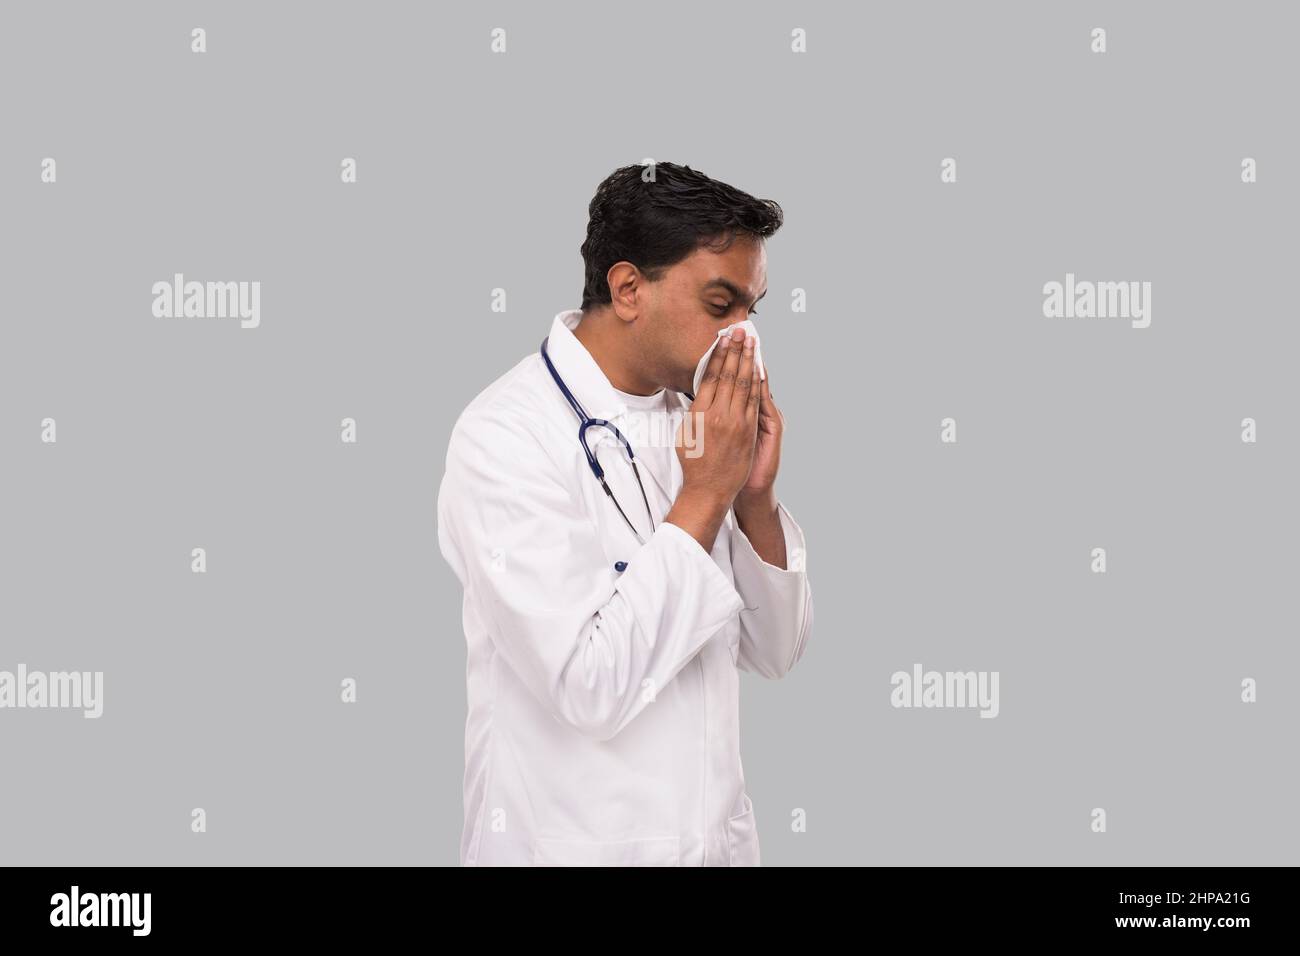 Doctor Sneezing. Doctor Blowing Nose Isolated. Medicine, Healthy Life, Virus Concept Stock Photo